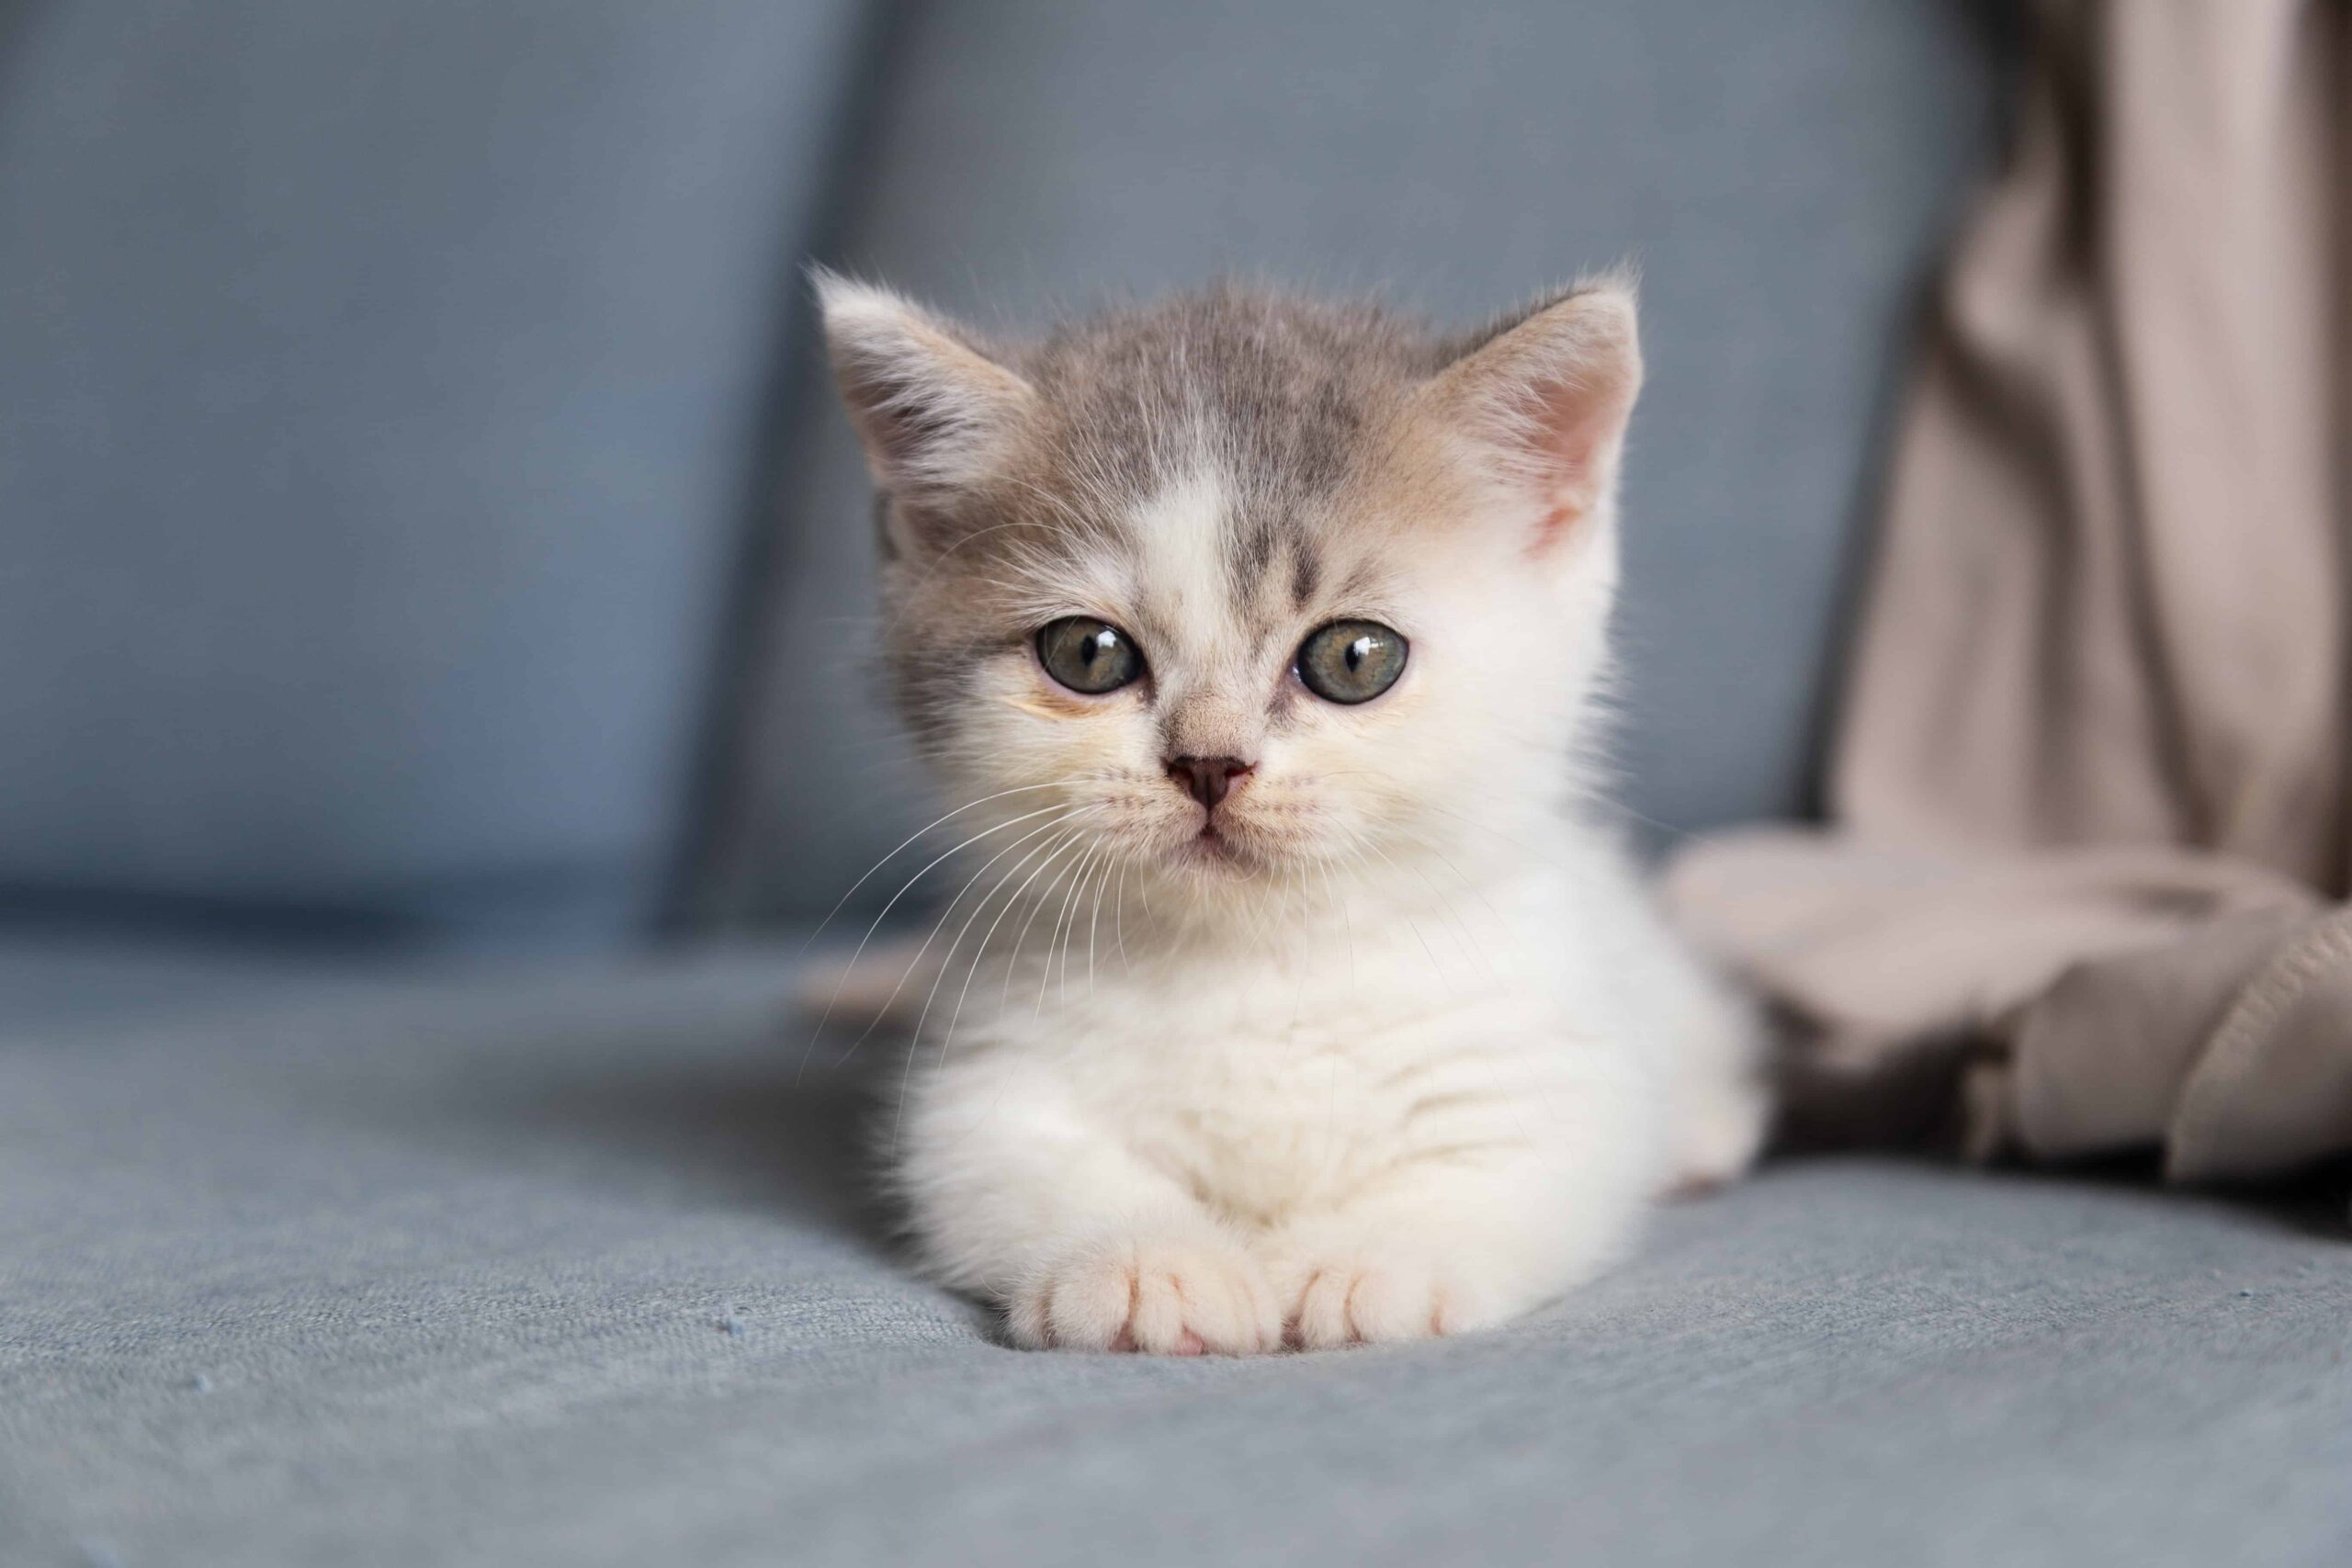 Calm kitten on a couch.